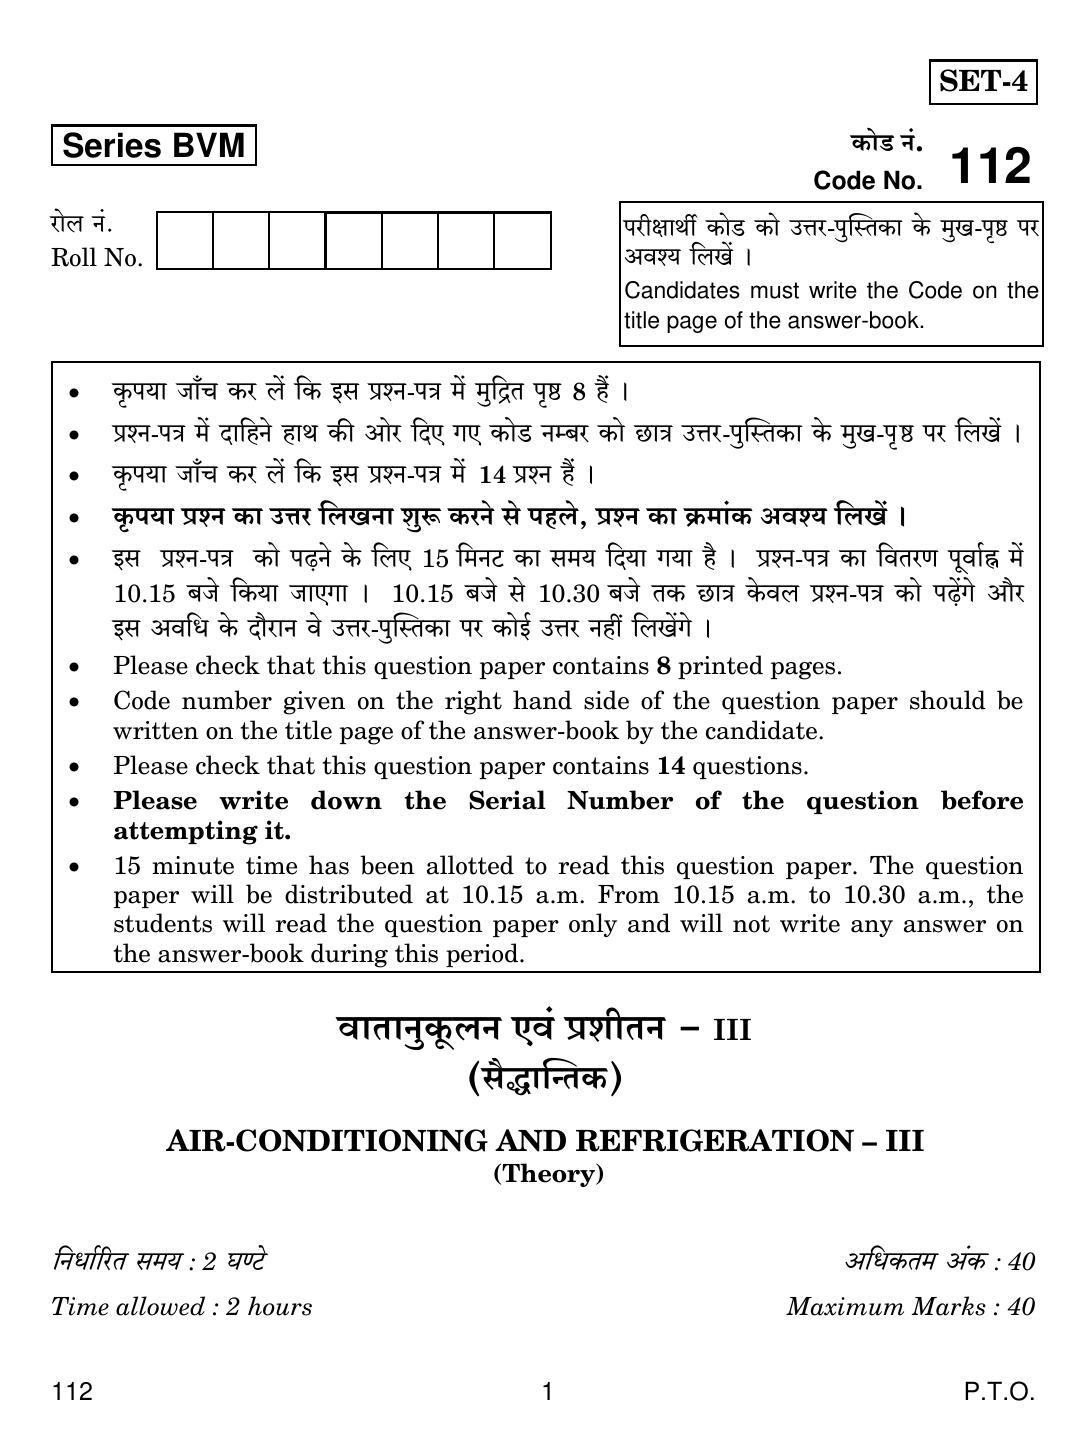 CBSE Class 12 112 Air-Conditioning And Refrigeration-III 2019 Question Paper - Page 1